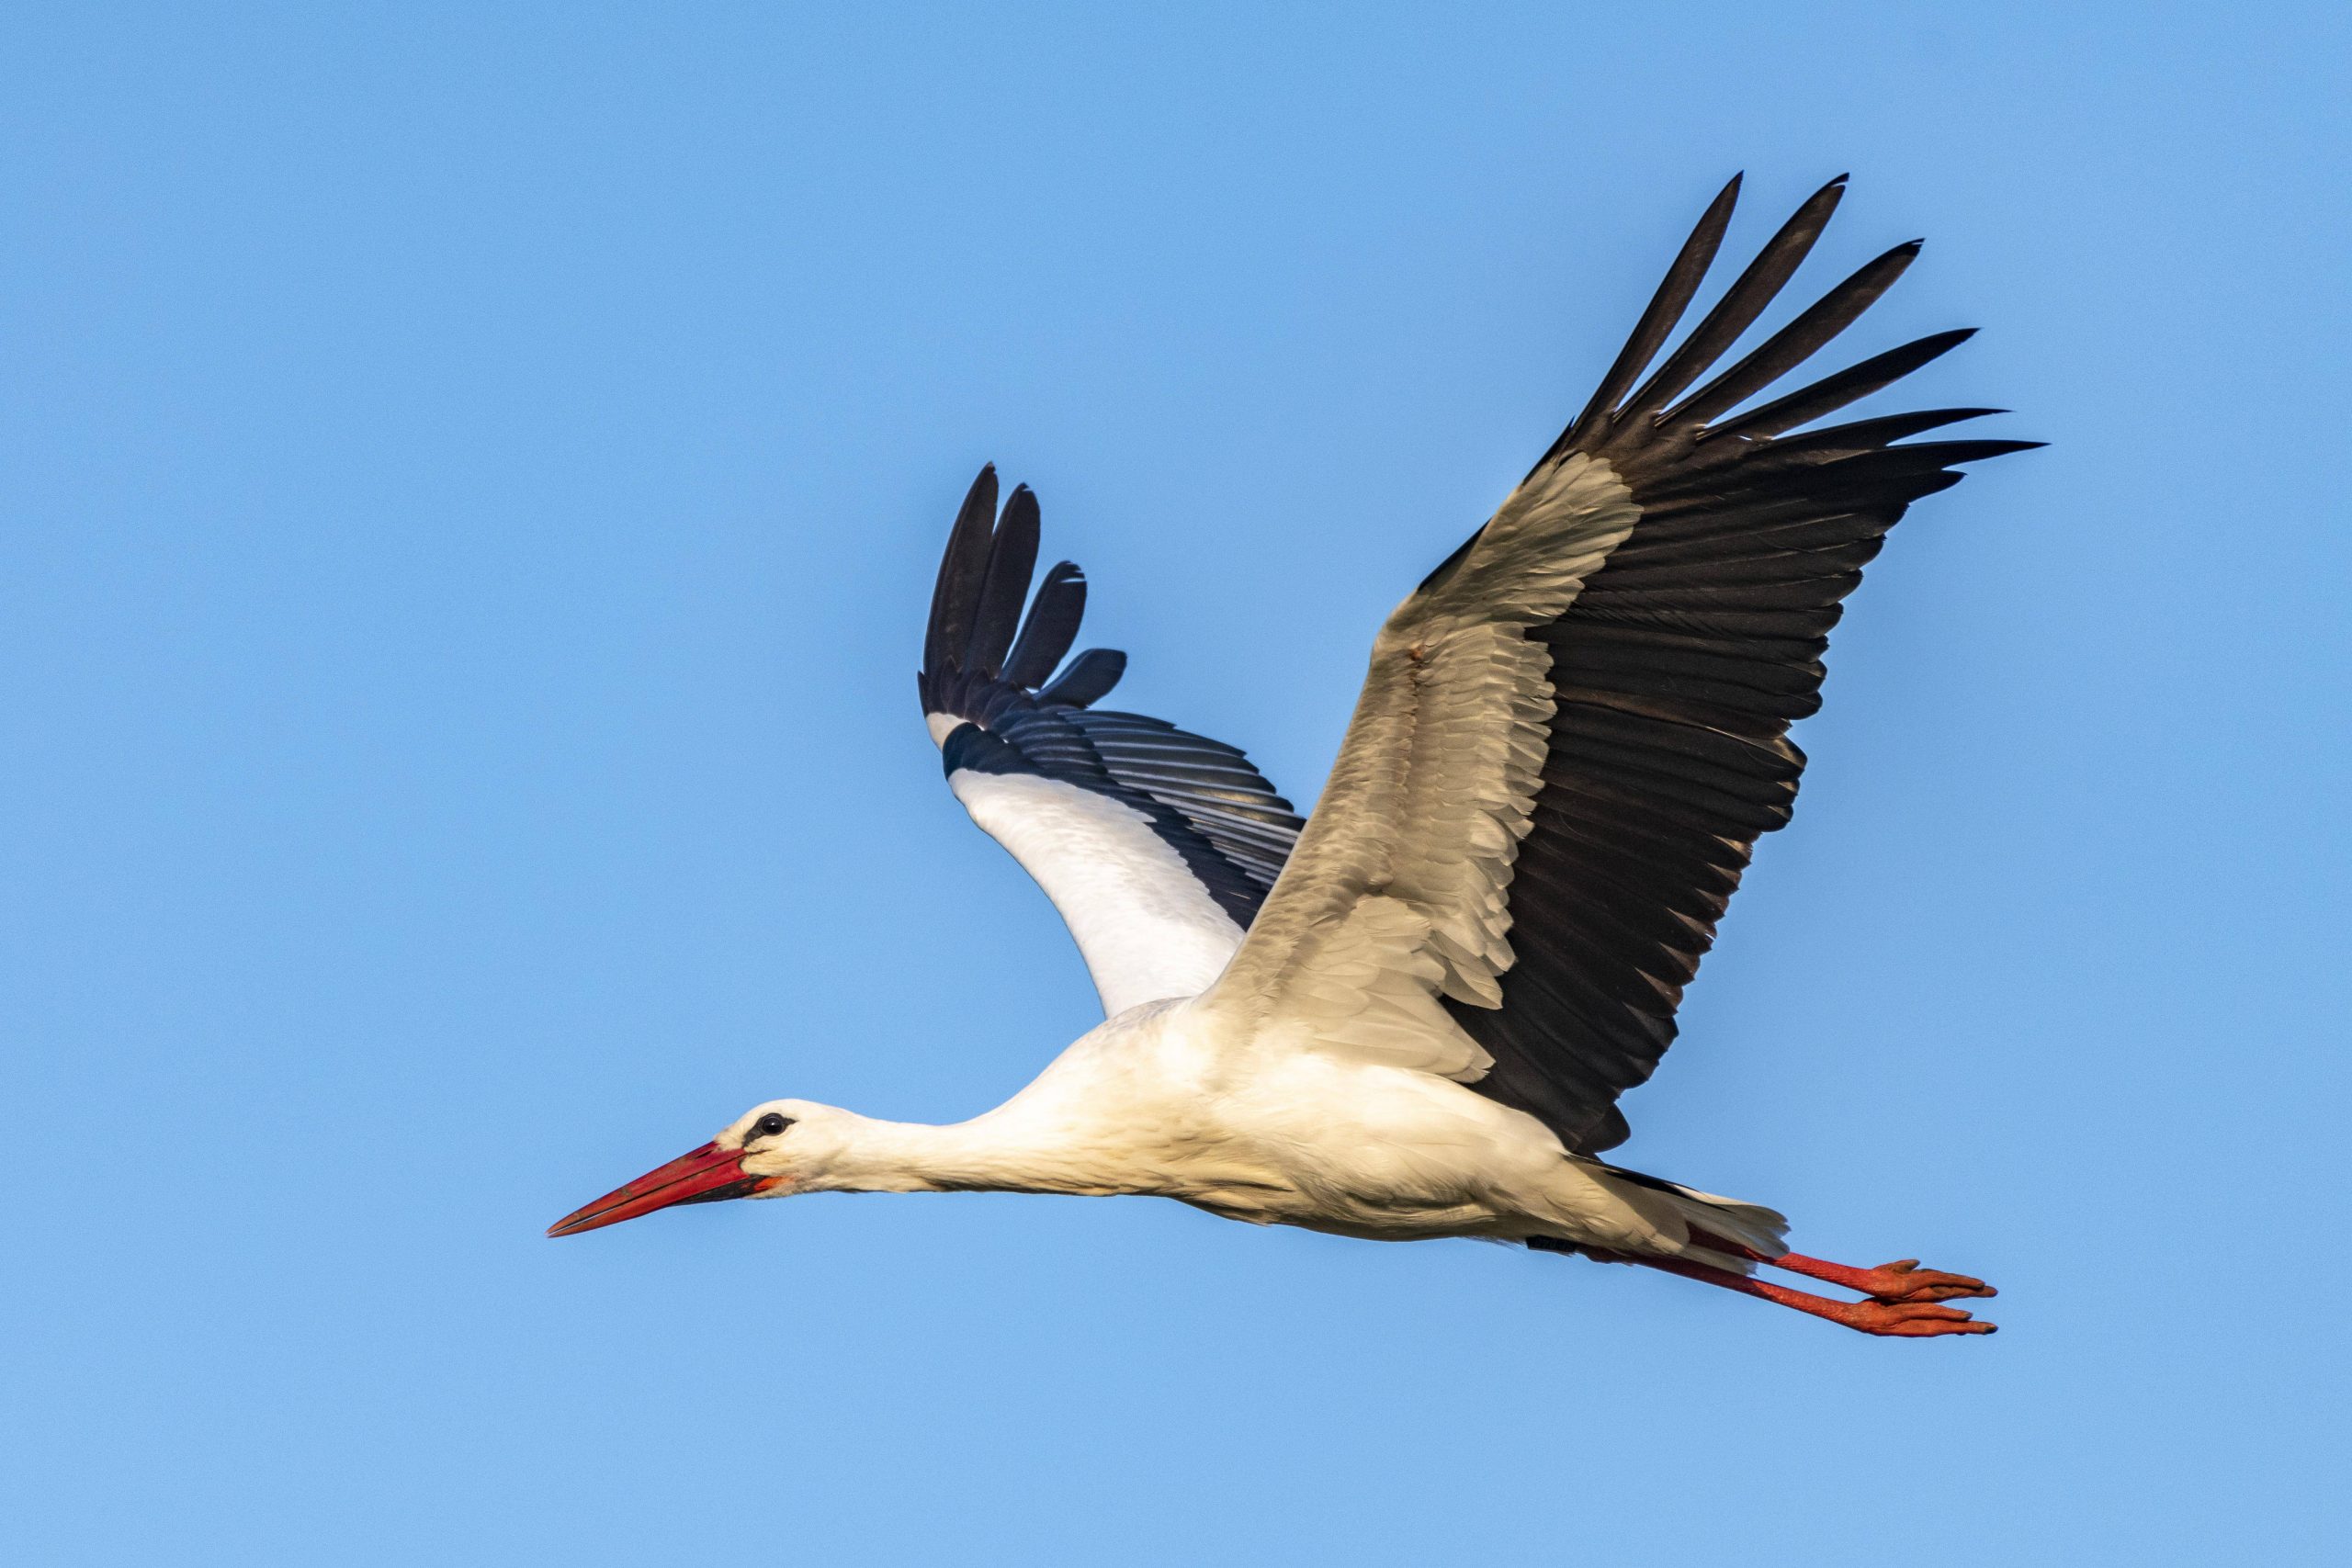 Migrating white stork birds are staying put in Spain to live off landfill sites